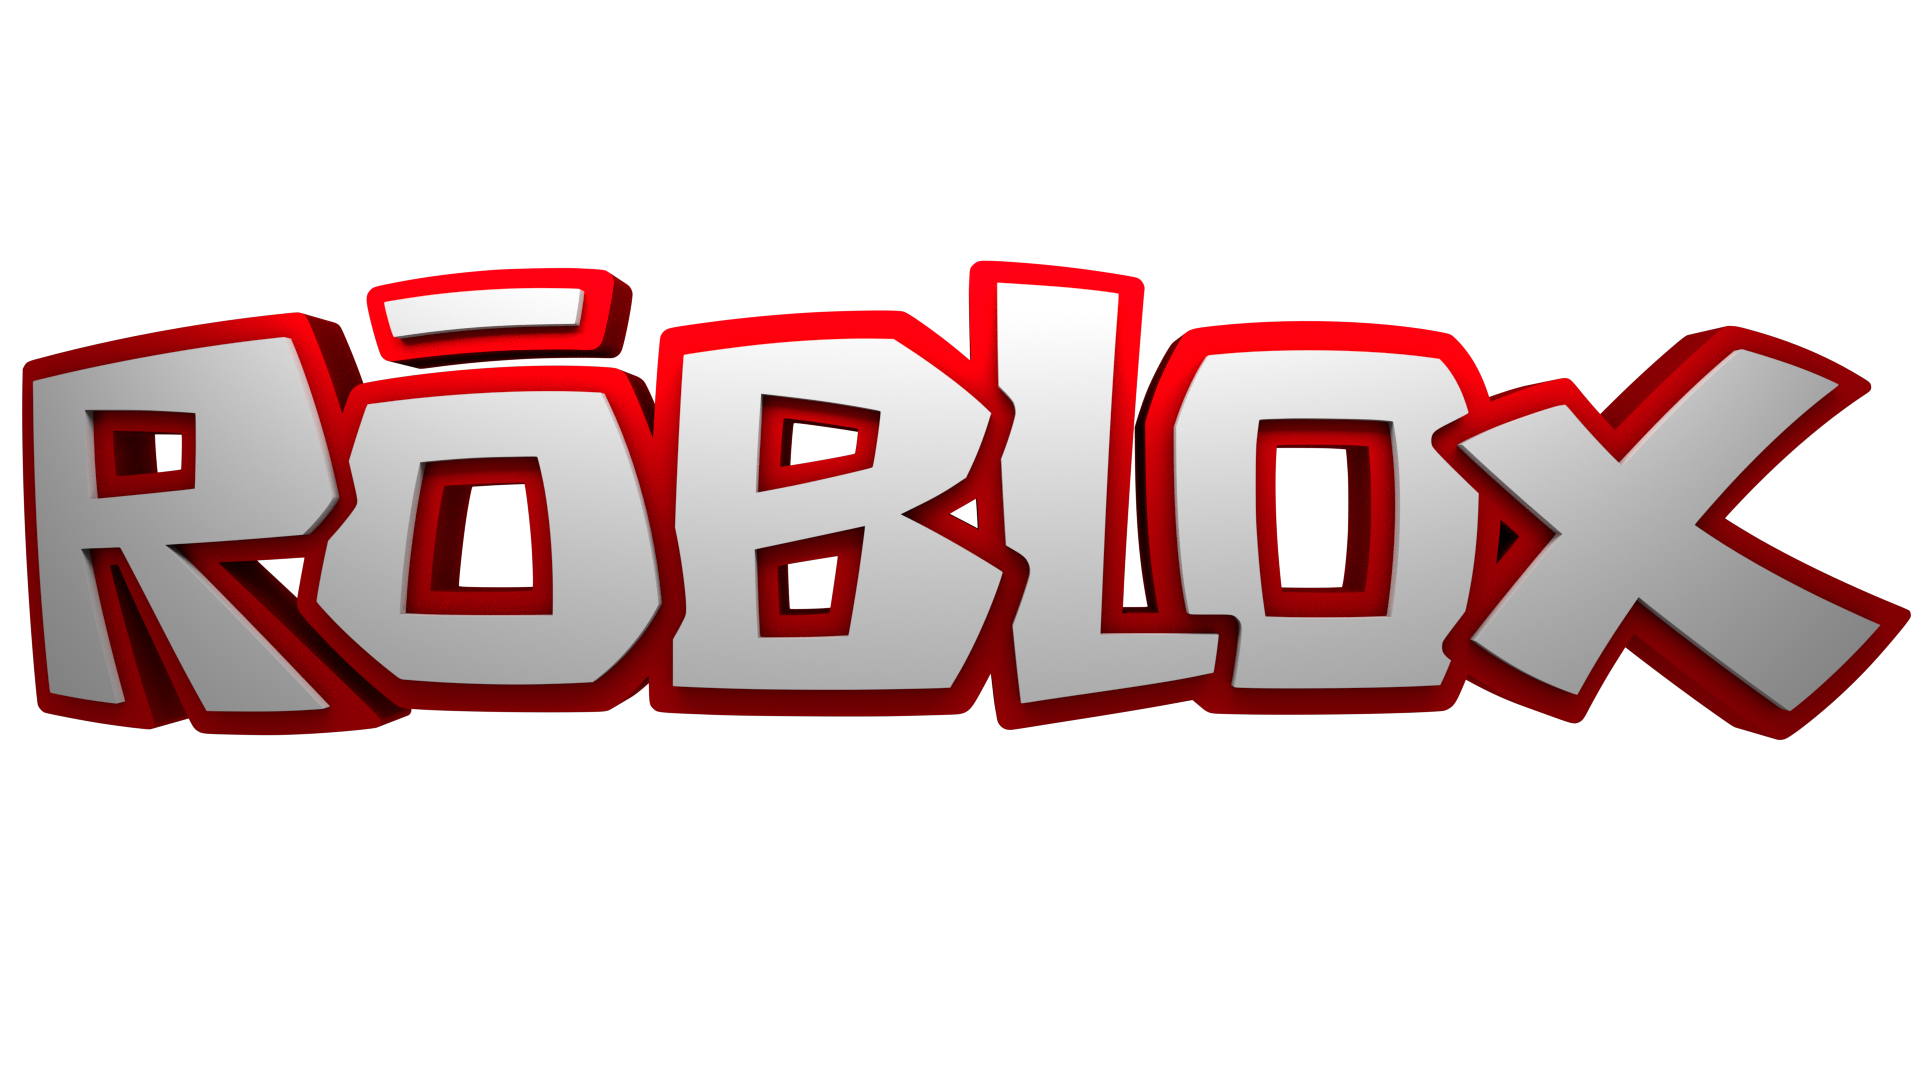 Roblox Inspired Transparent Background Images .png Instant 